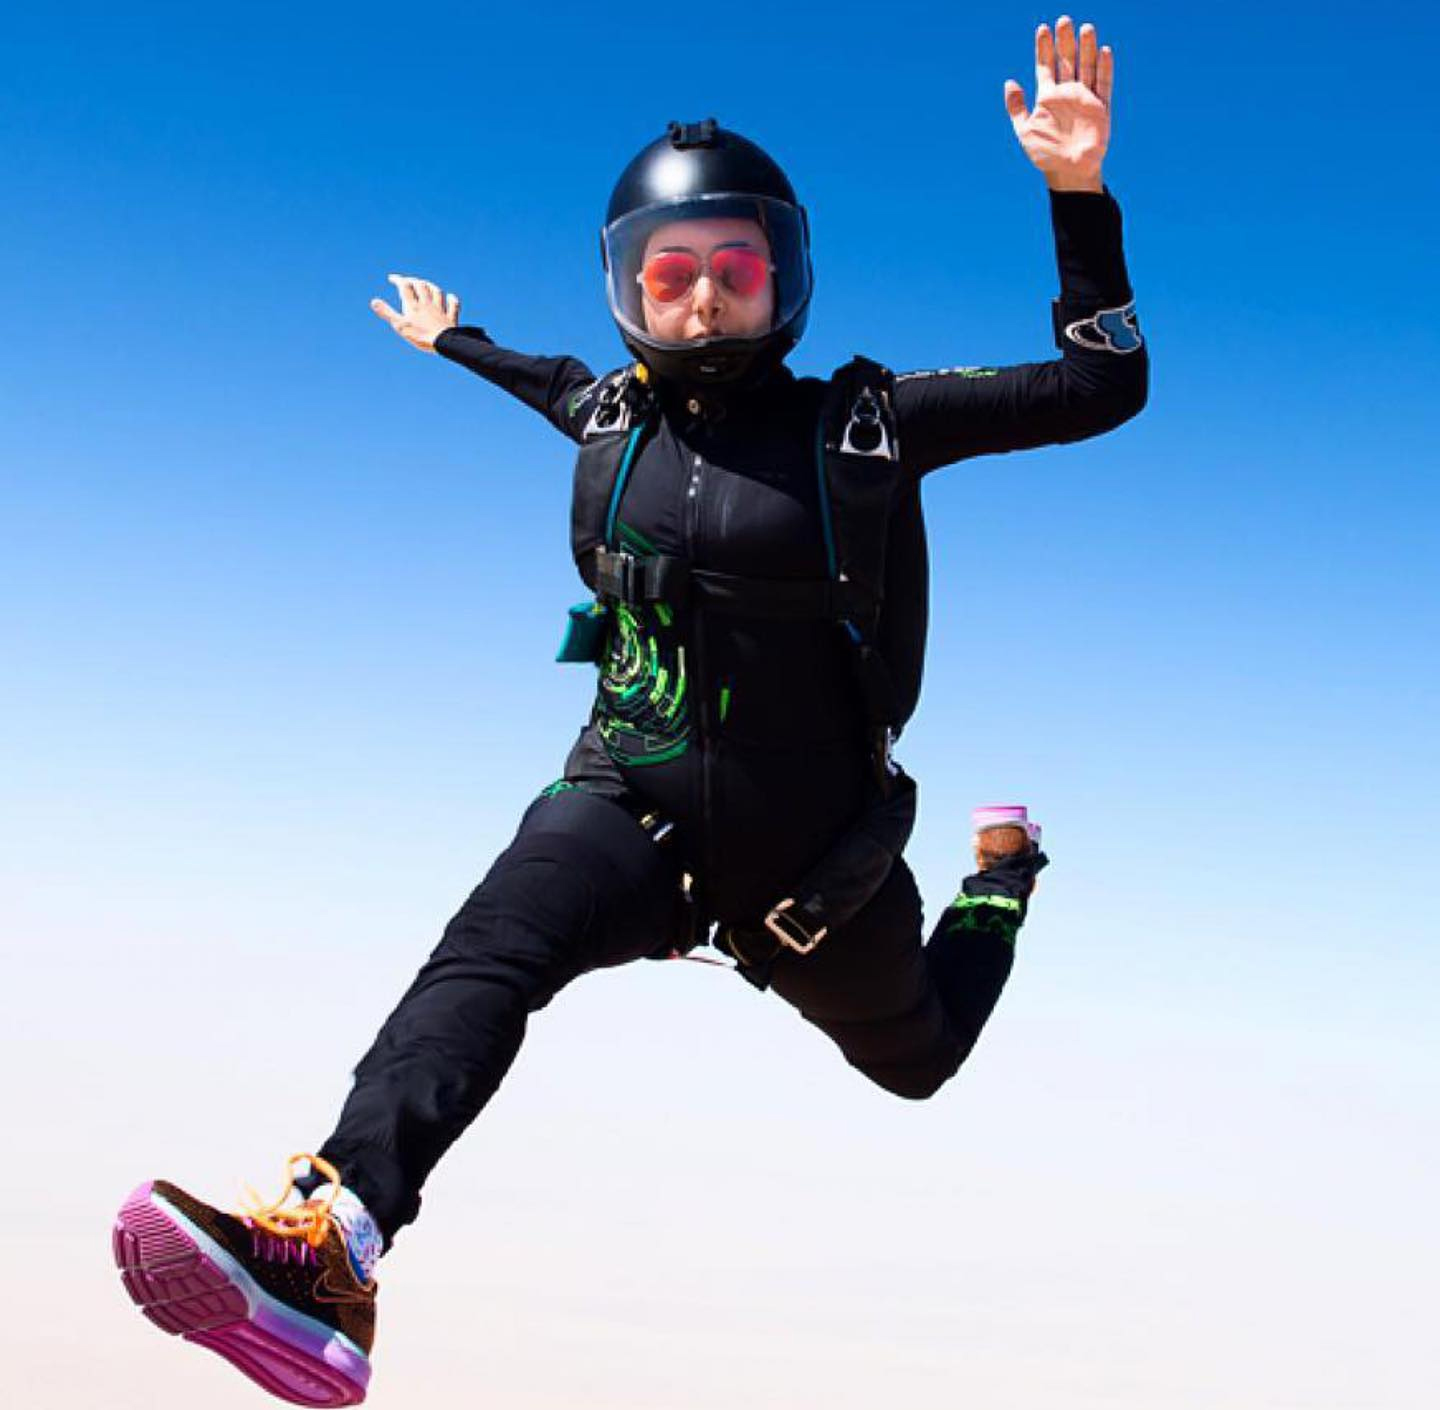 Princess Sheikha Latifa during one of her many skydiving jumps.